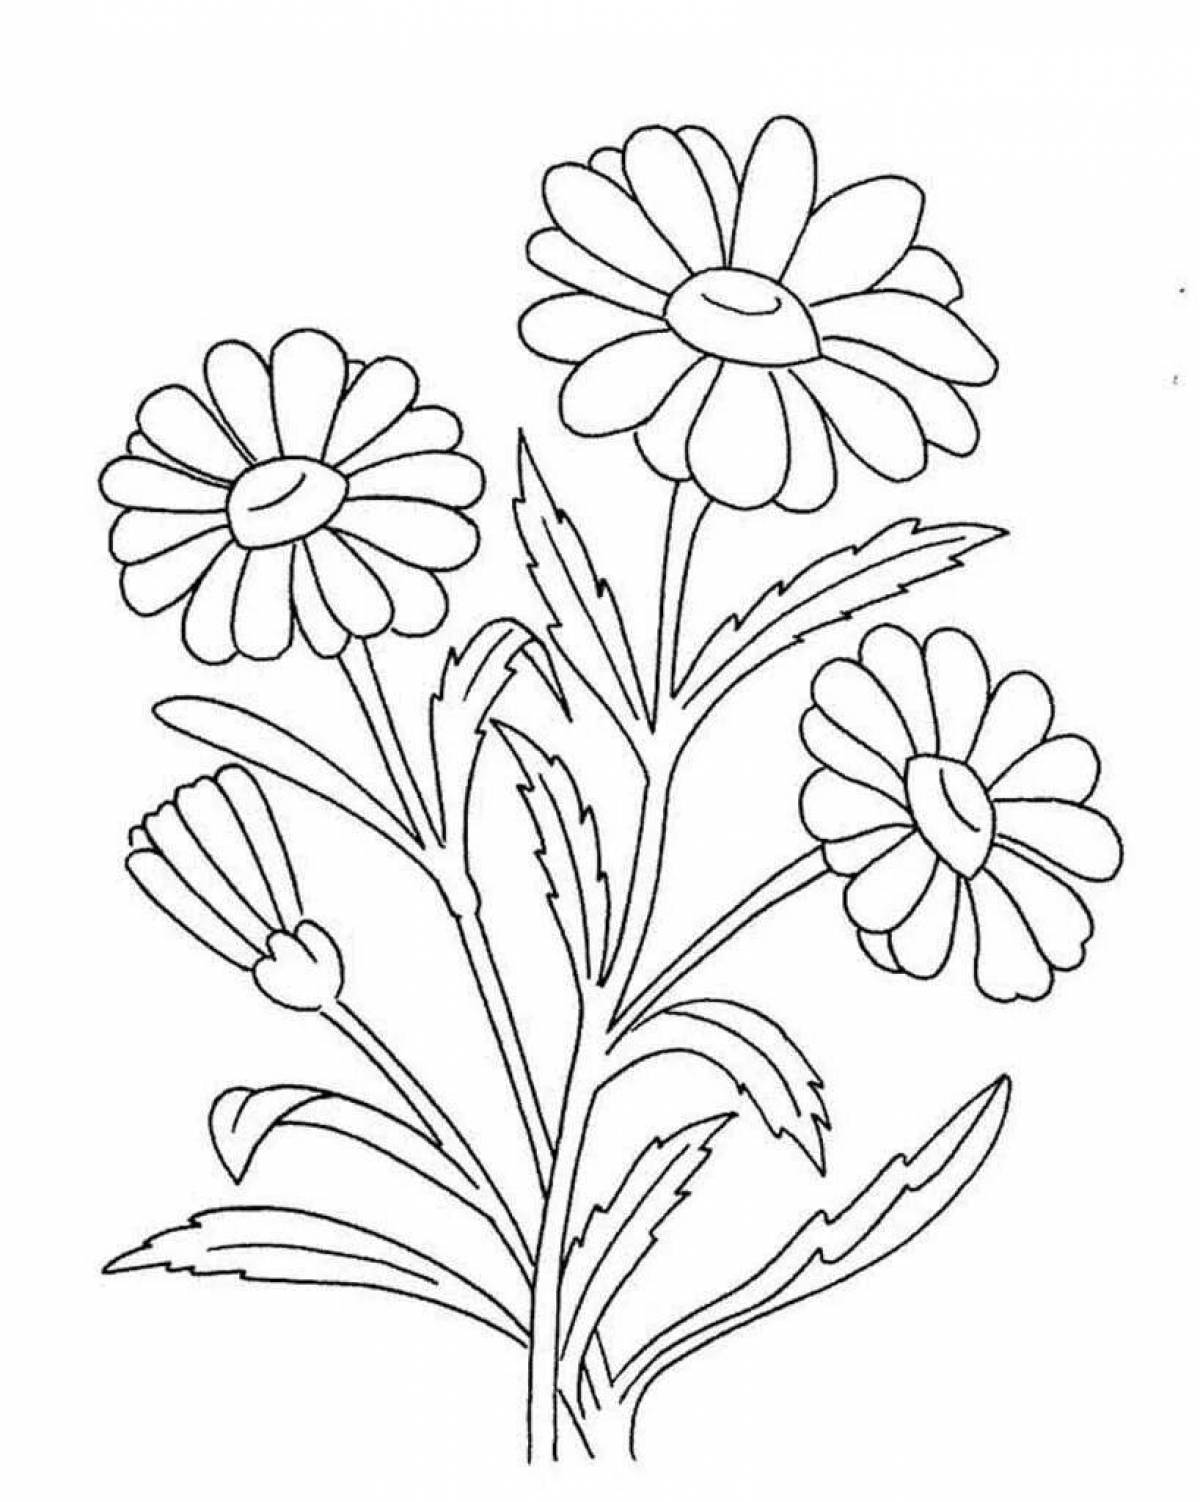 Adorable daisy coloring book for toddlers